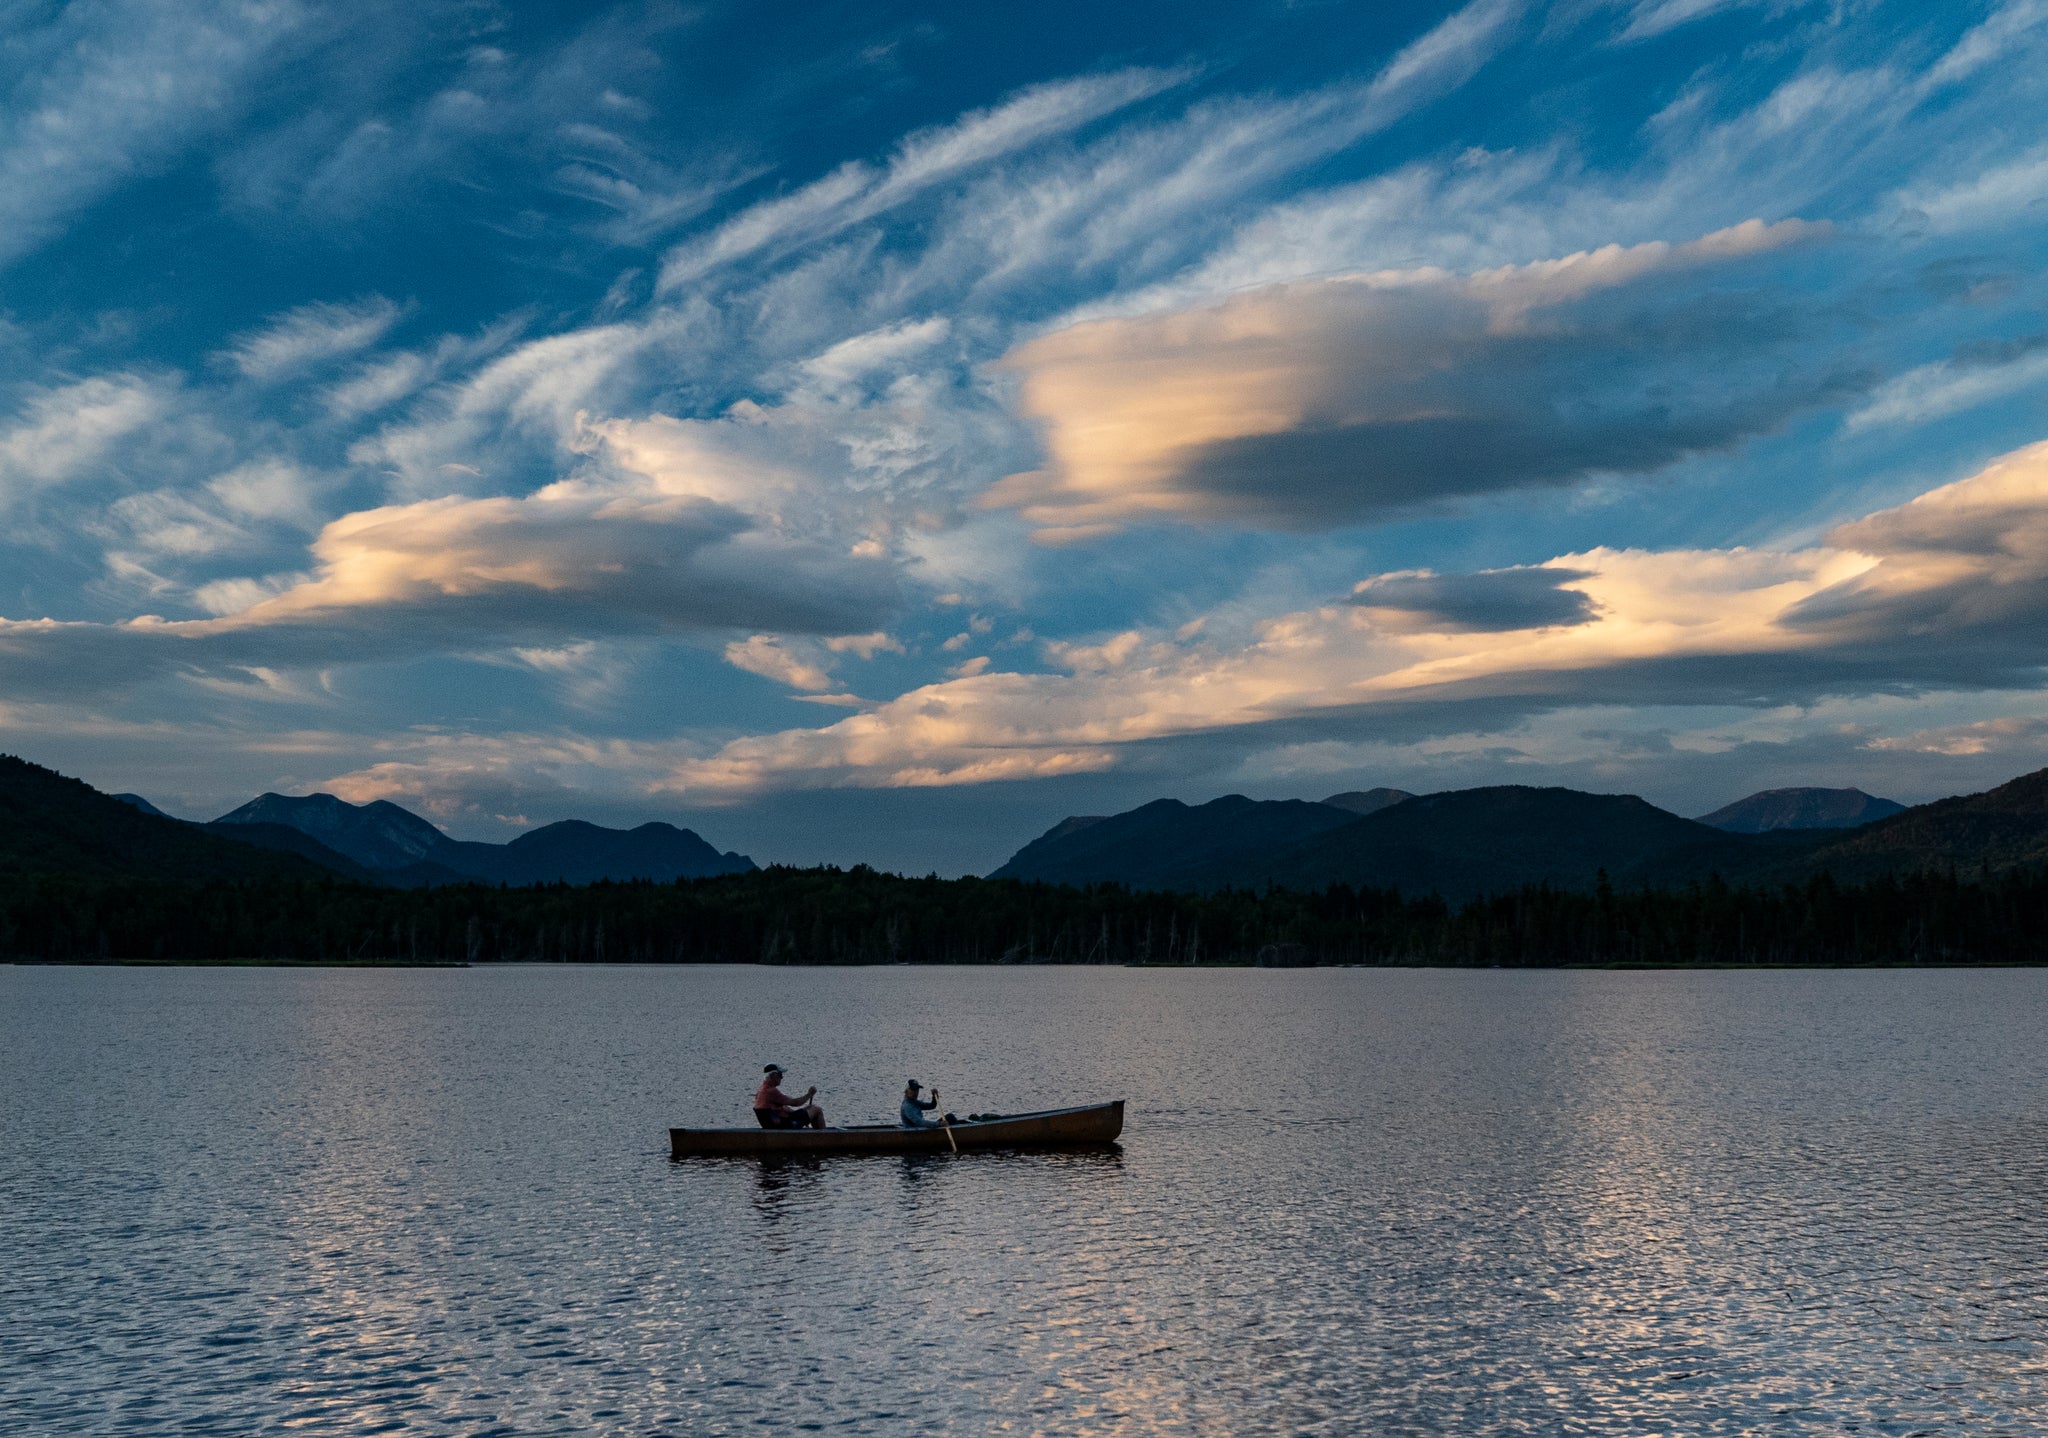 Two people in a canoe on serene water